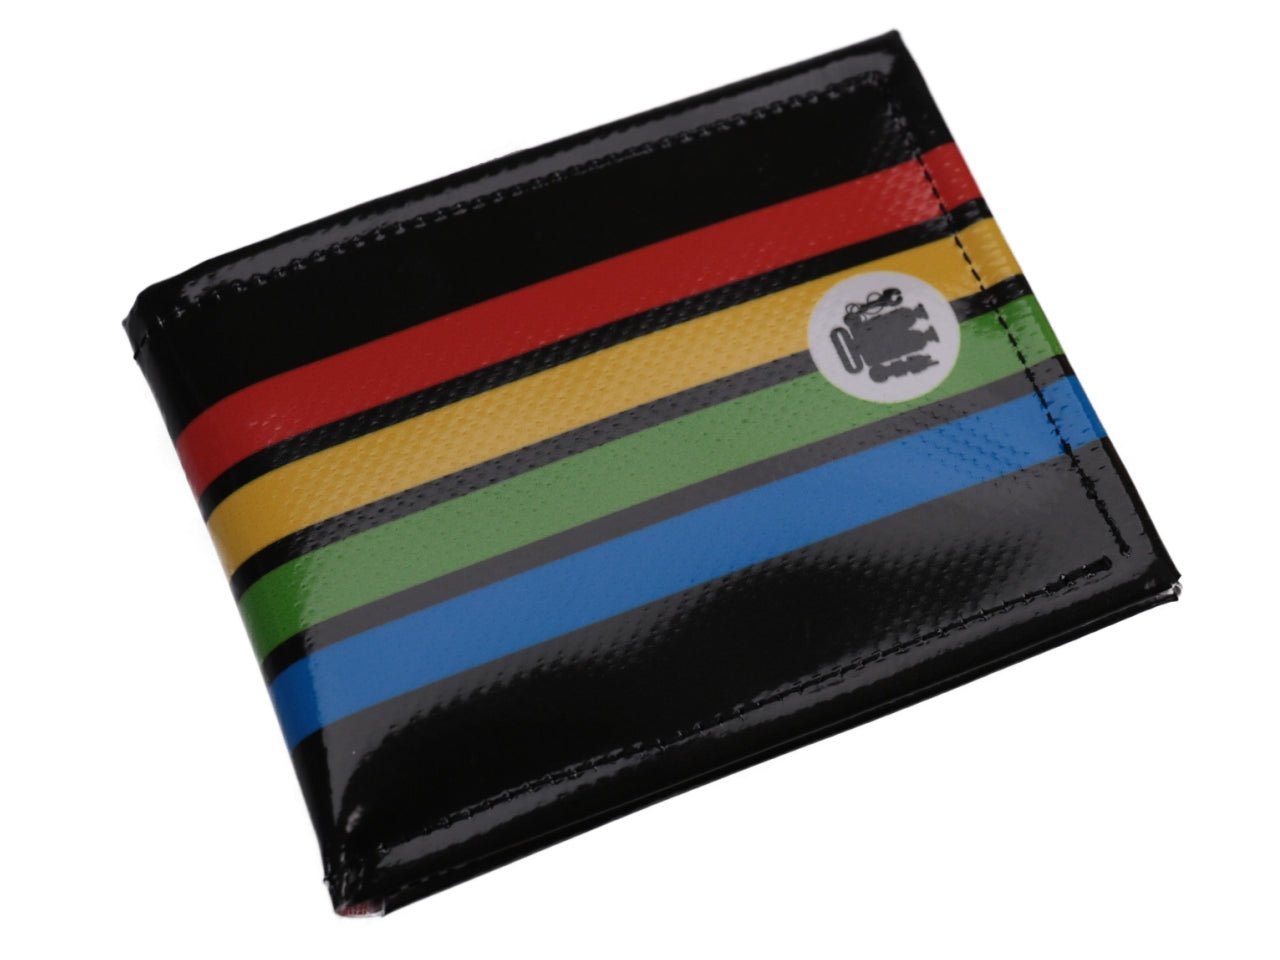 MEN'S WALLET BLACK WITH COLOURFUL STRIPES. MODEL CRIK MADE OF LORRY TARPAULIN. - Limited Edition Paul Meccanico